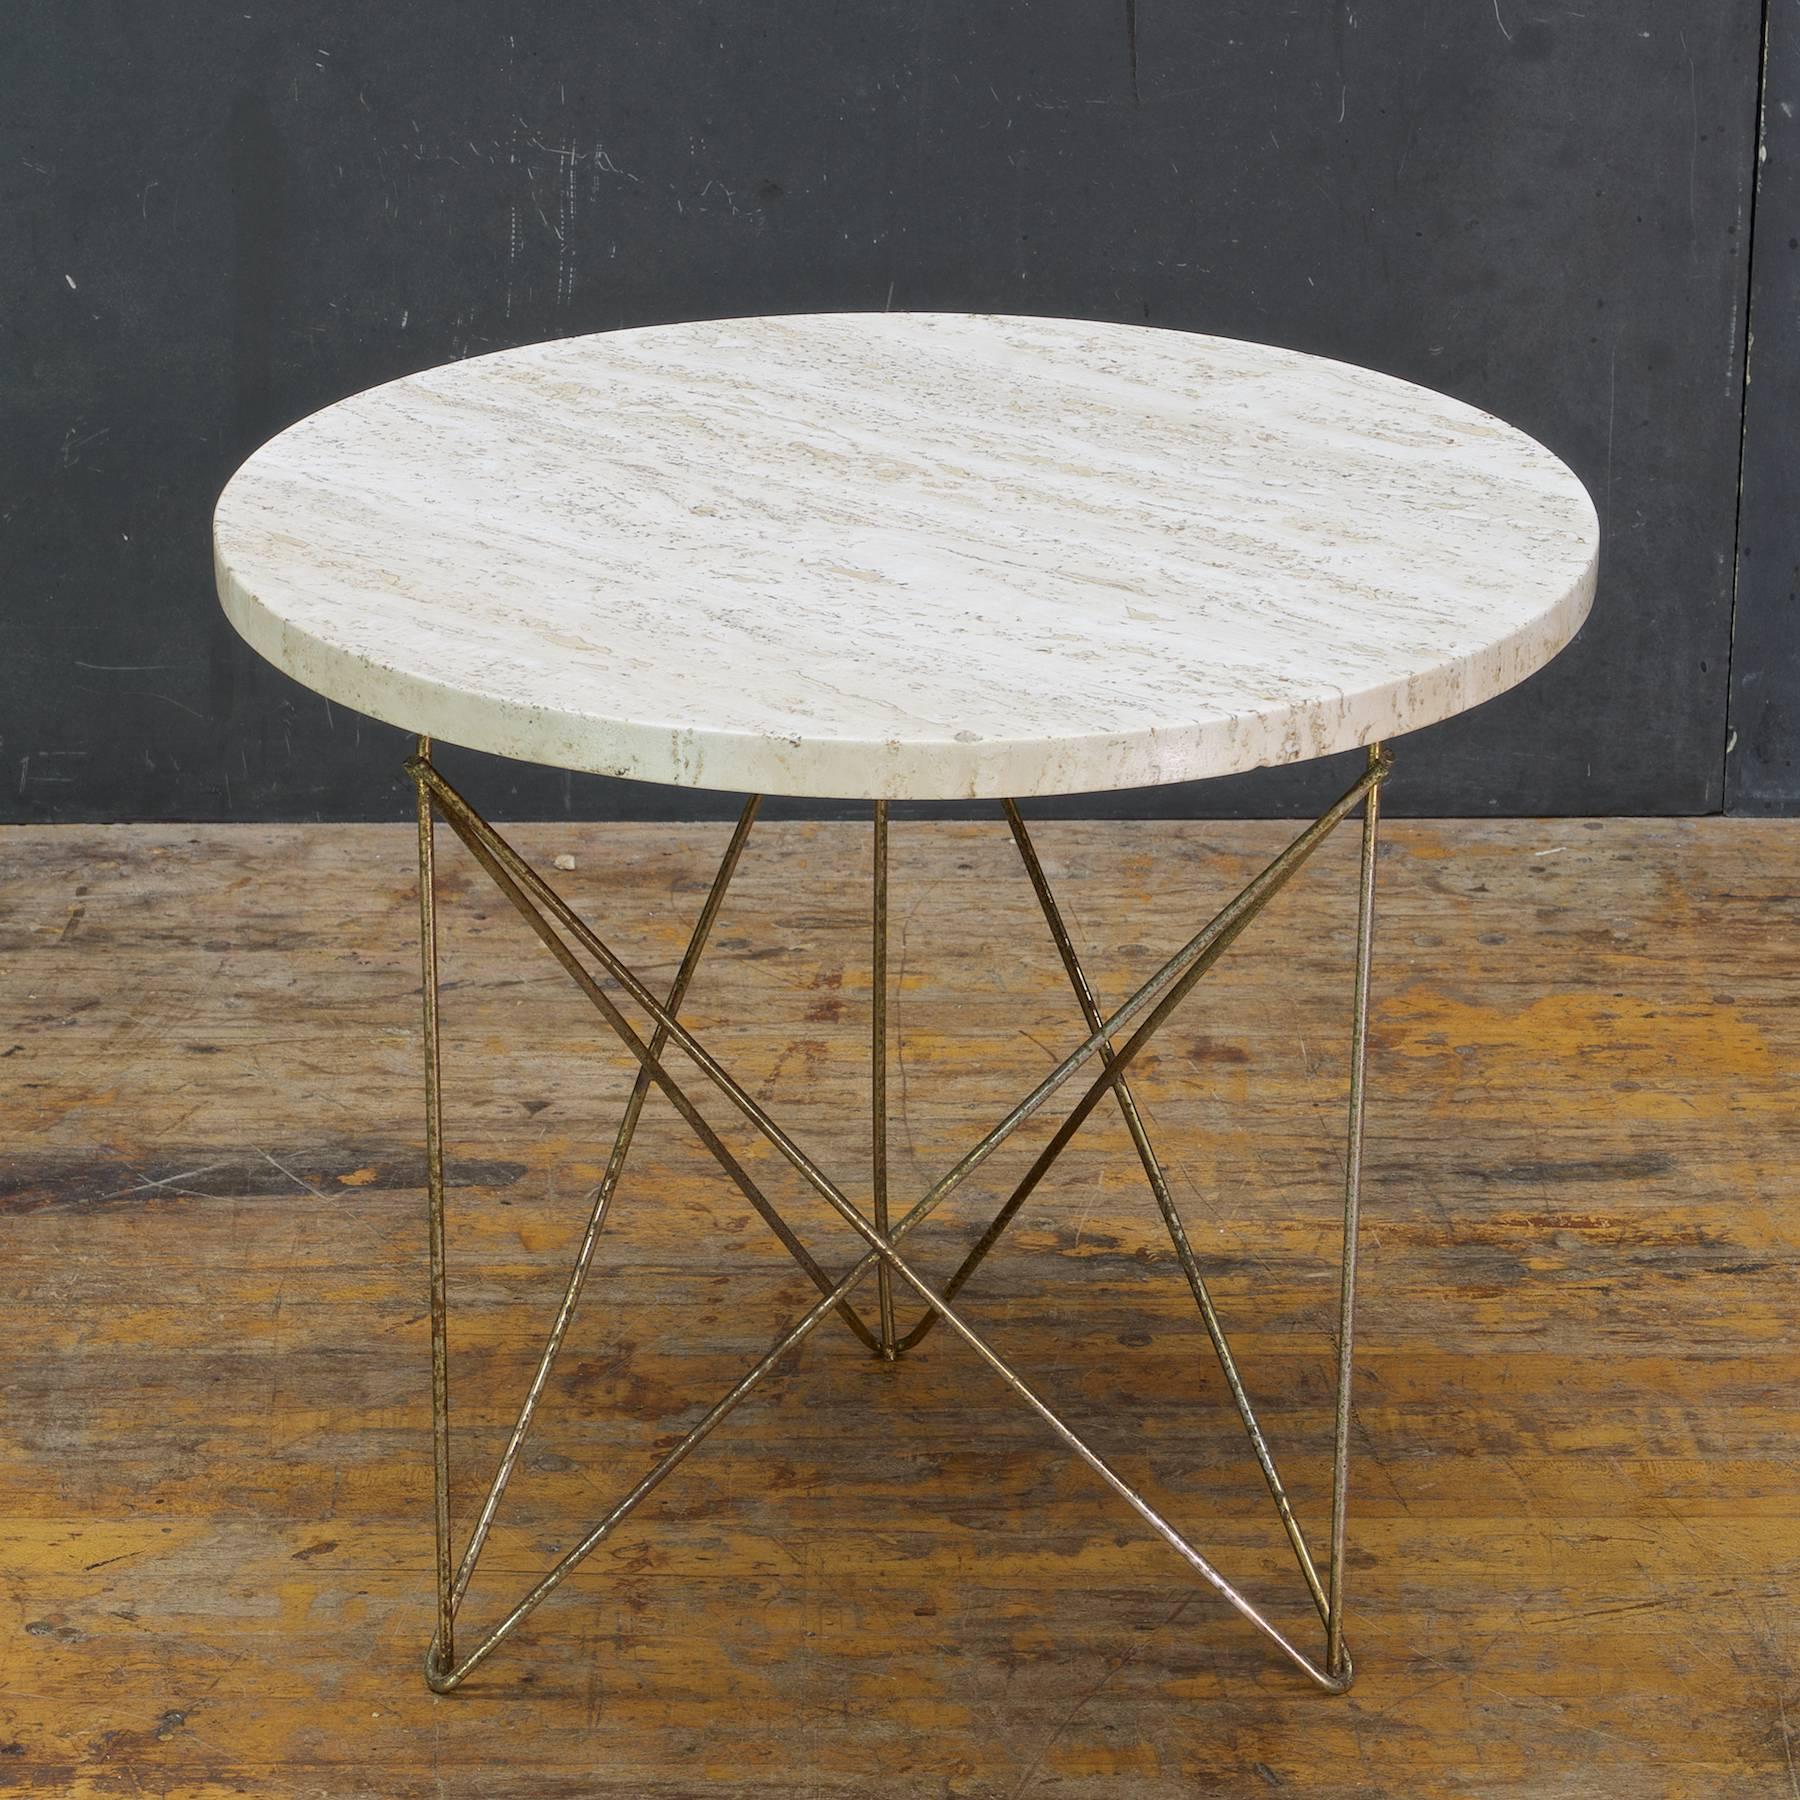 Sea shore weather brass rod/wire pedestal with matte finished travertine top on a back wooden triangular Sub base and brass-plated wire.